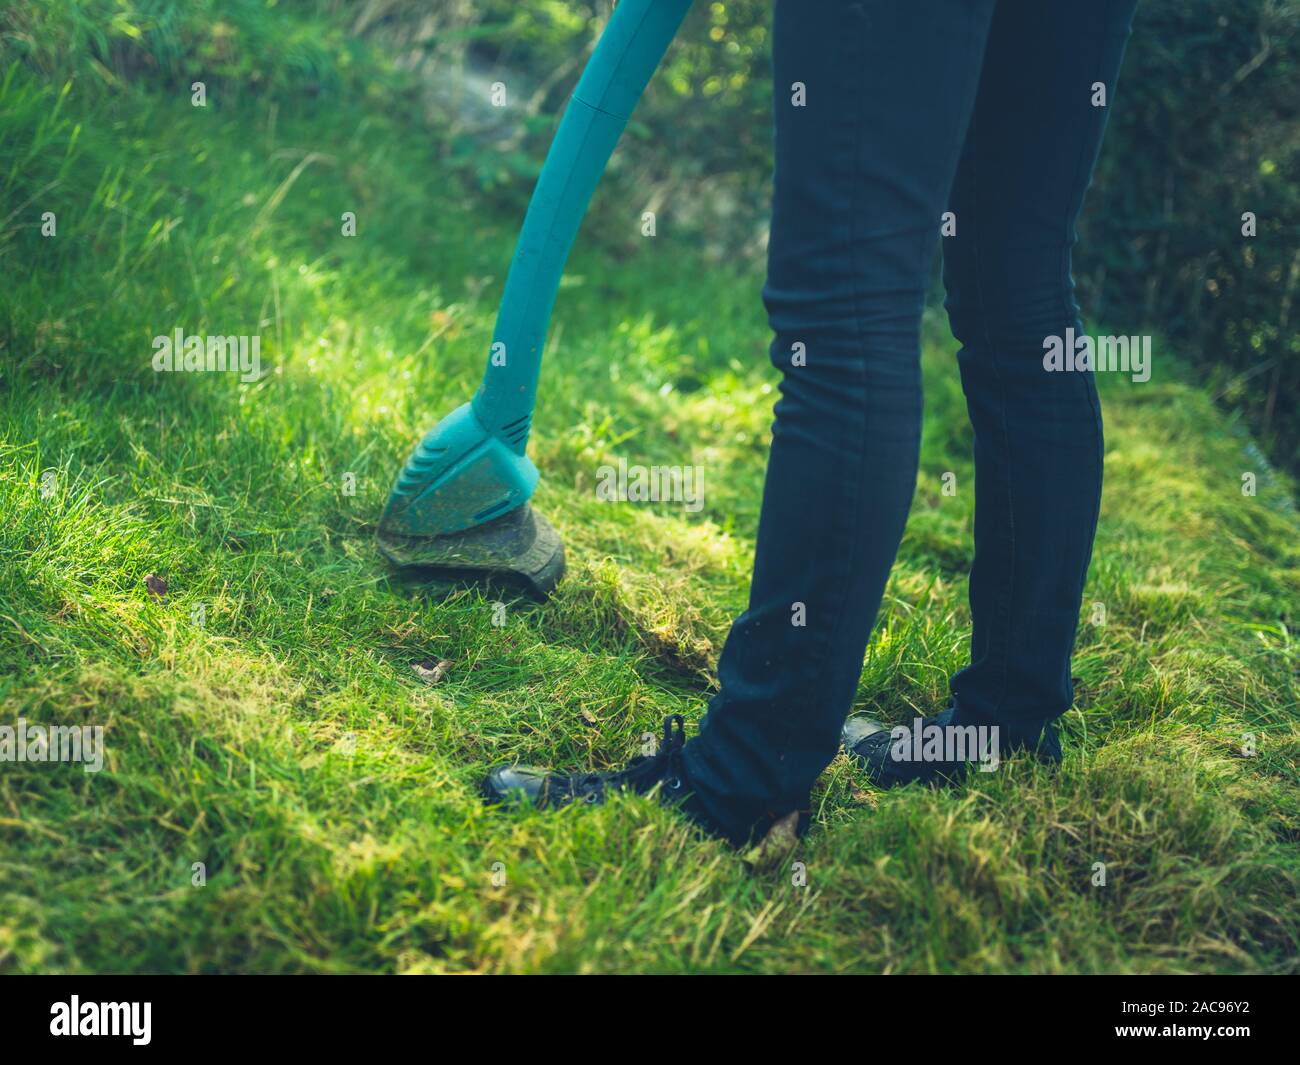 A young woman is cutting the lawn using a grass strimmer Stock Photo